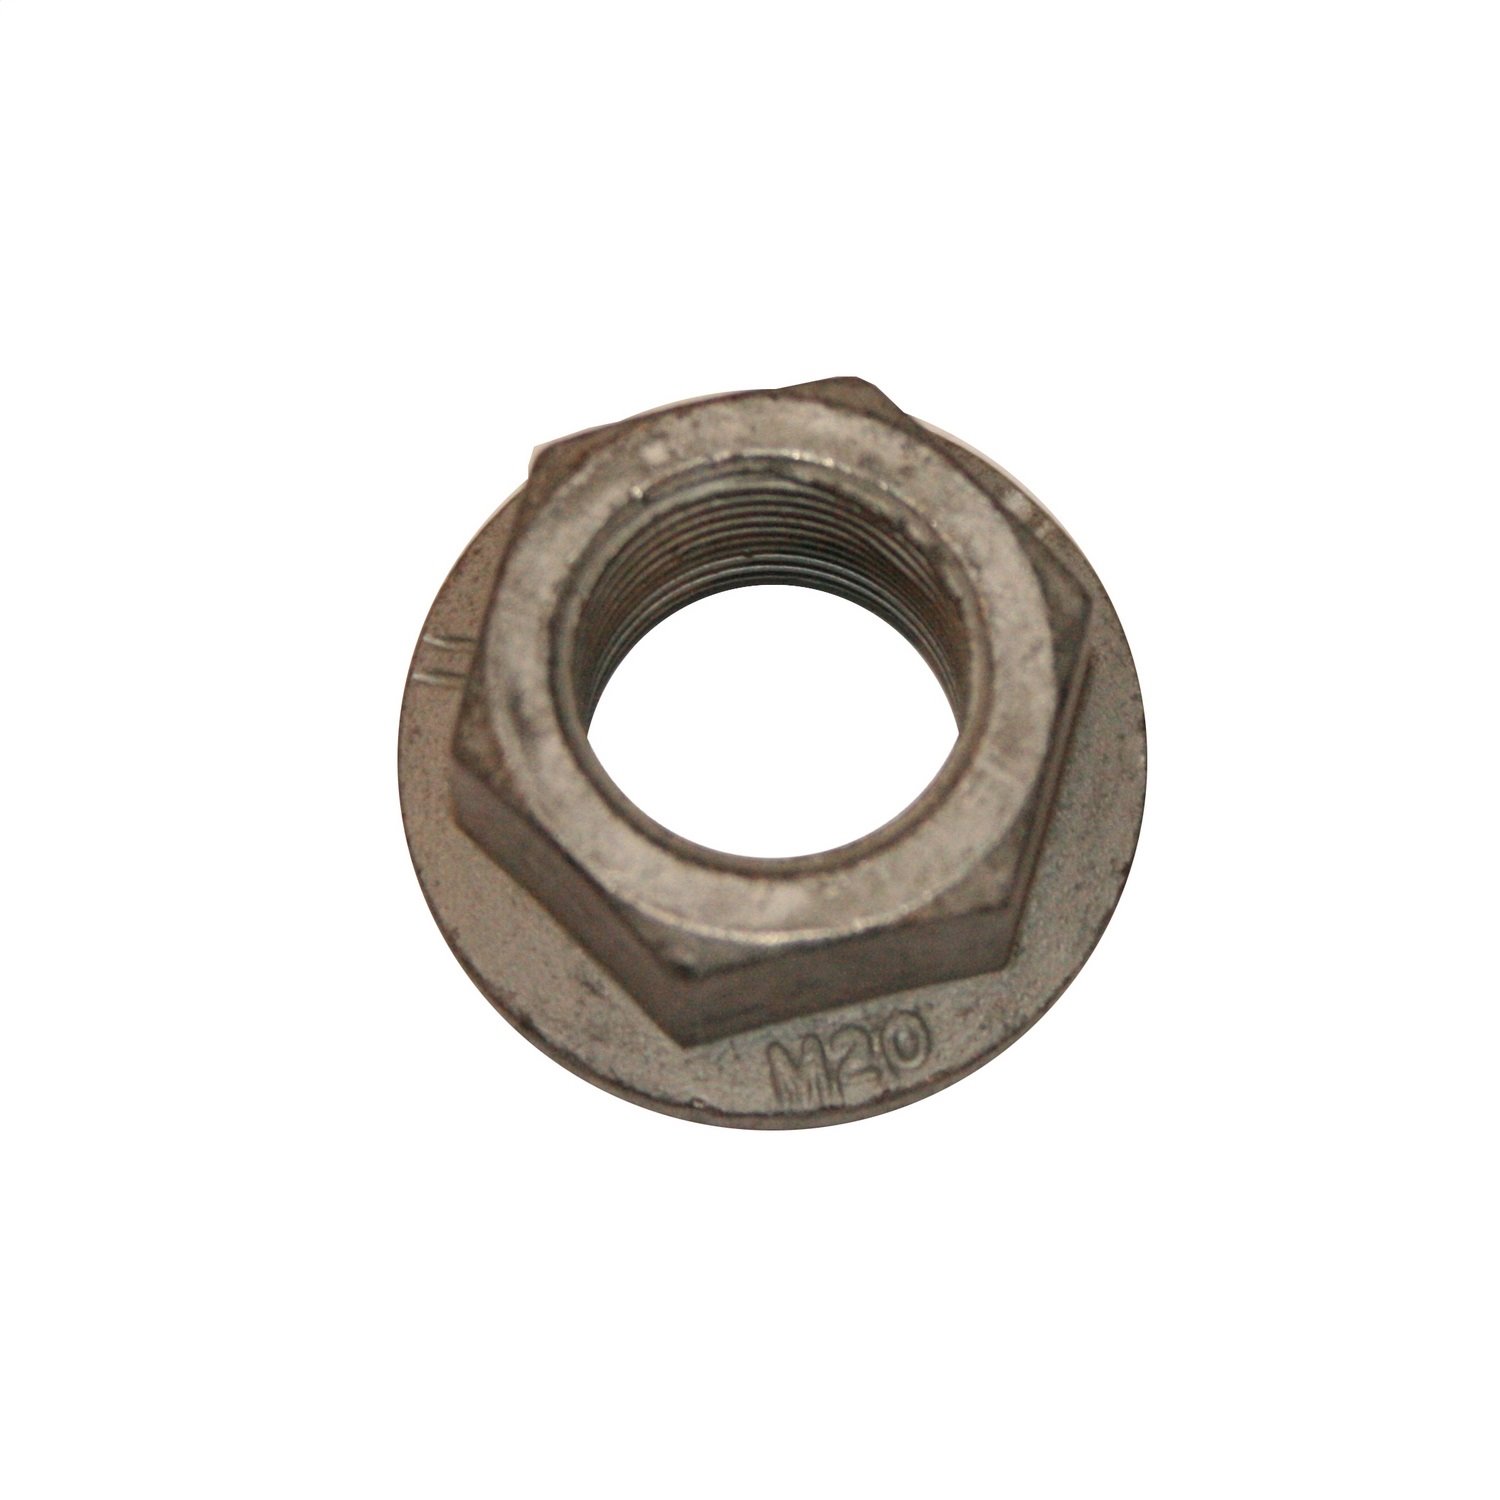 NP231 Front Output Yoke Nut 1987-1999 Jeep Wrangler By Omix-ADA